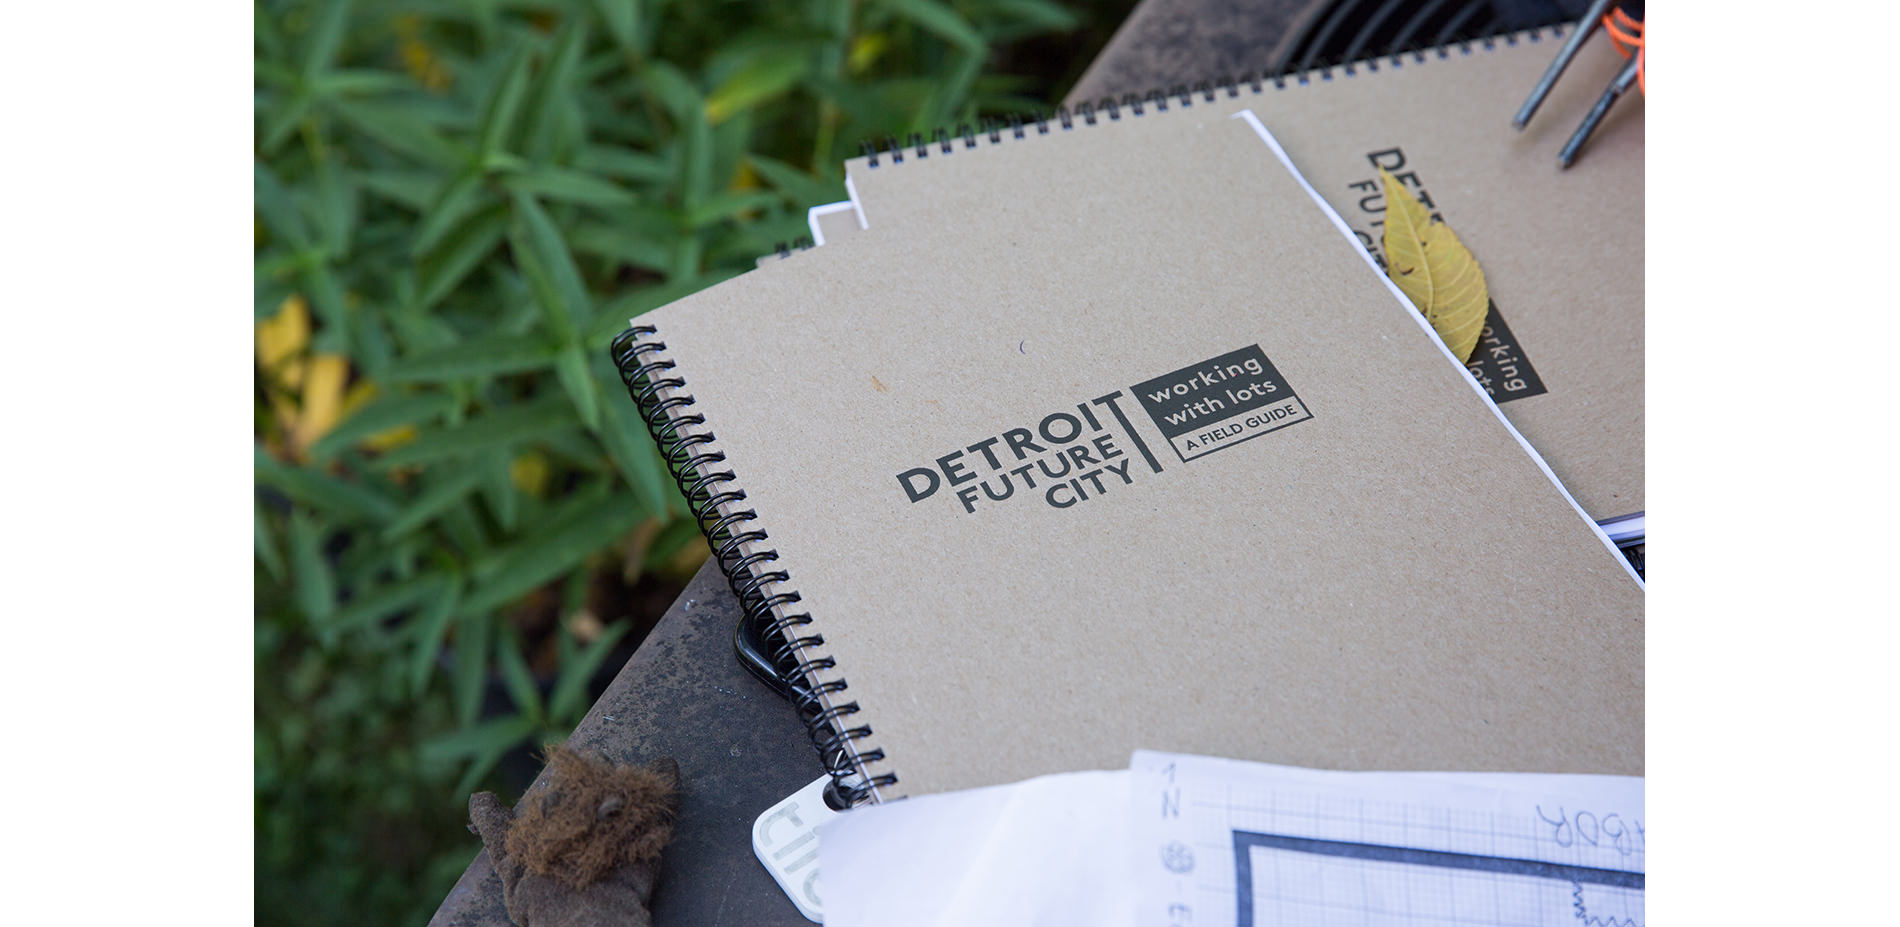 Printed Version of the Field Guide Companion Workbook